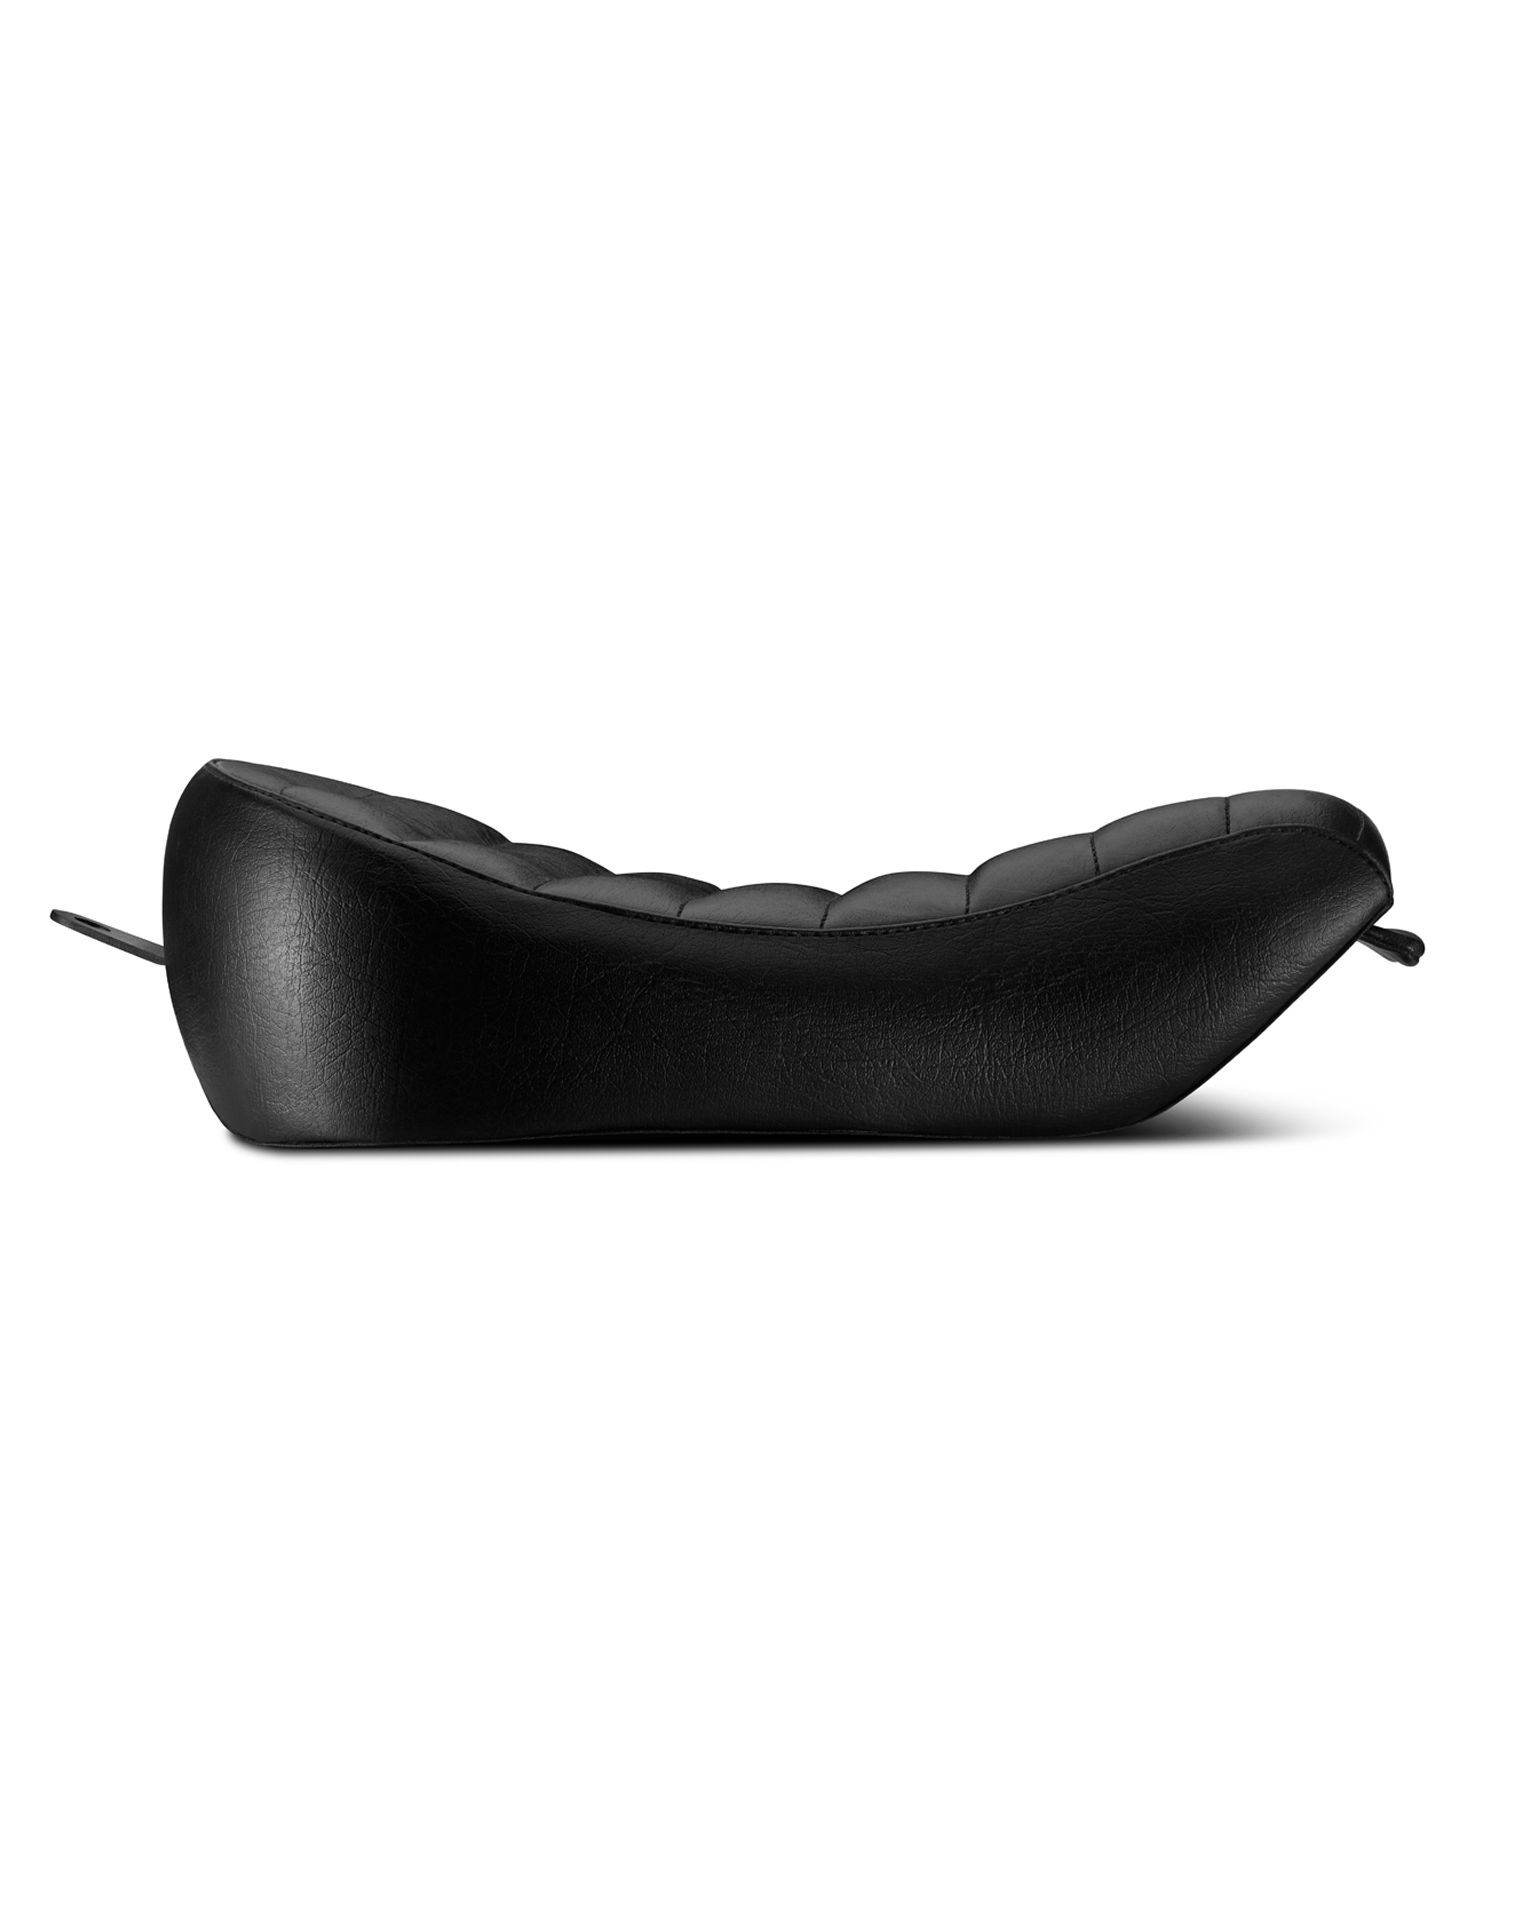 Iron Born Horizontal Stitch Motorcycle Solo Seat for Sportster 1200 Nightster XL1200N Side View